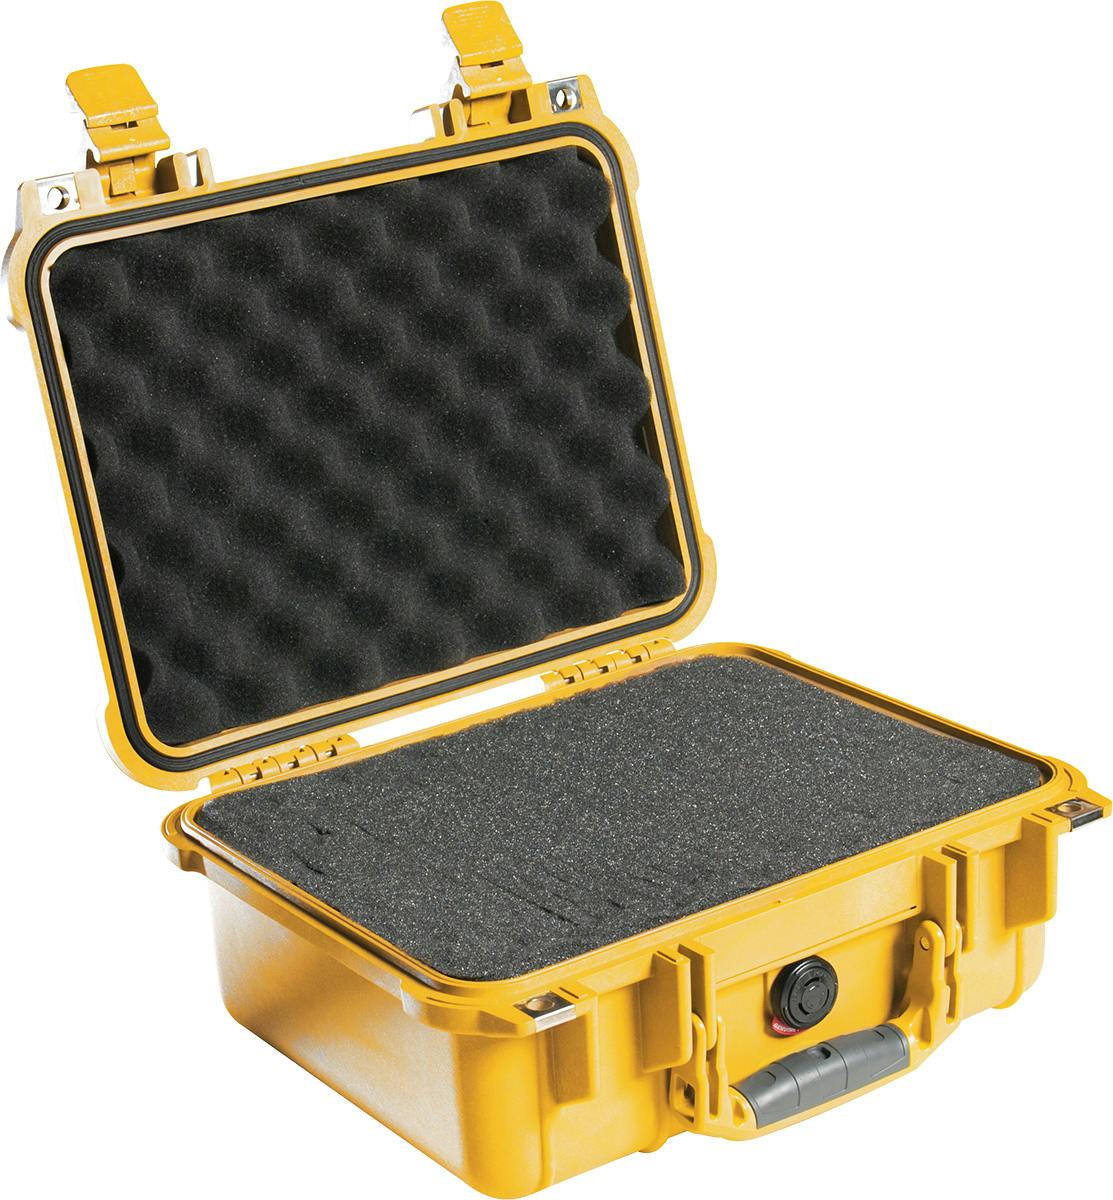 PELICAN CASE | 1400 Protector, Yellow with foam